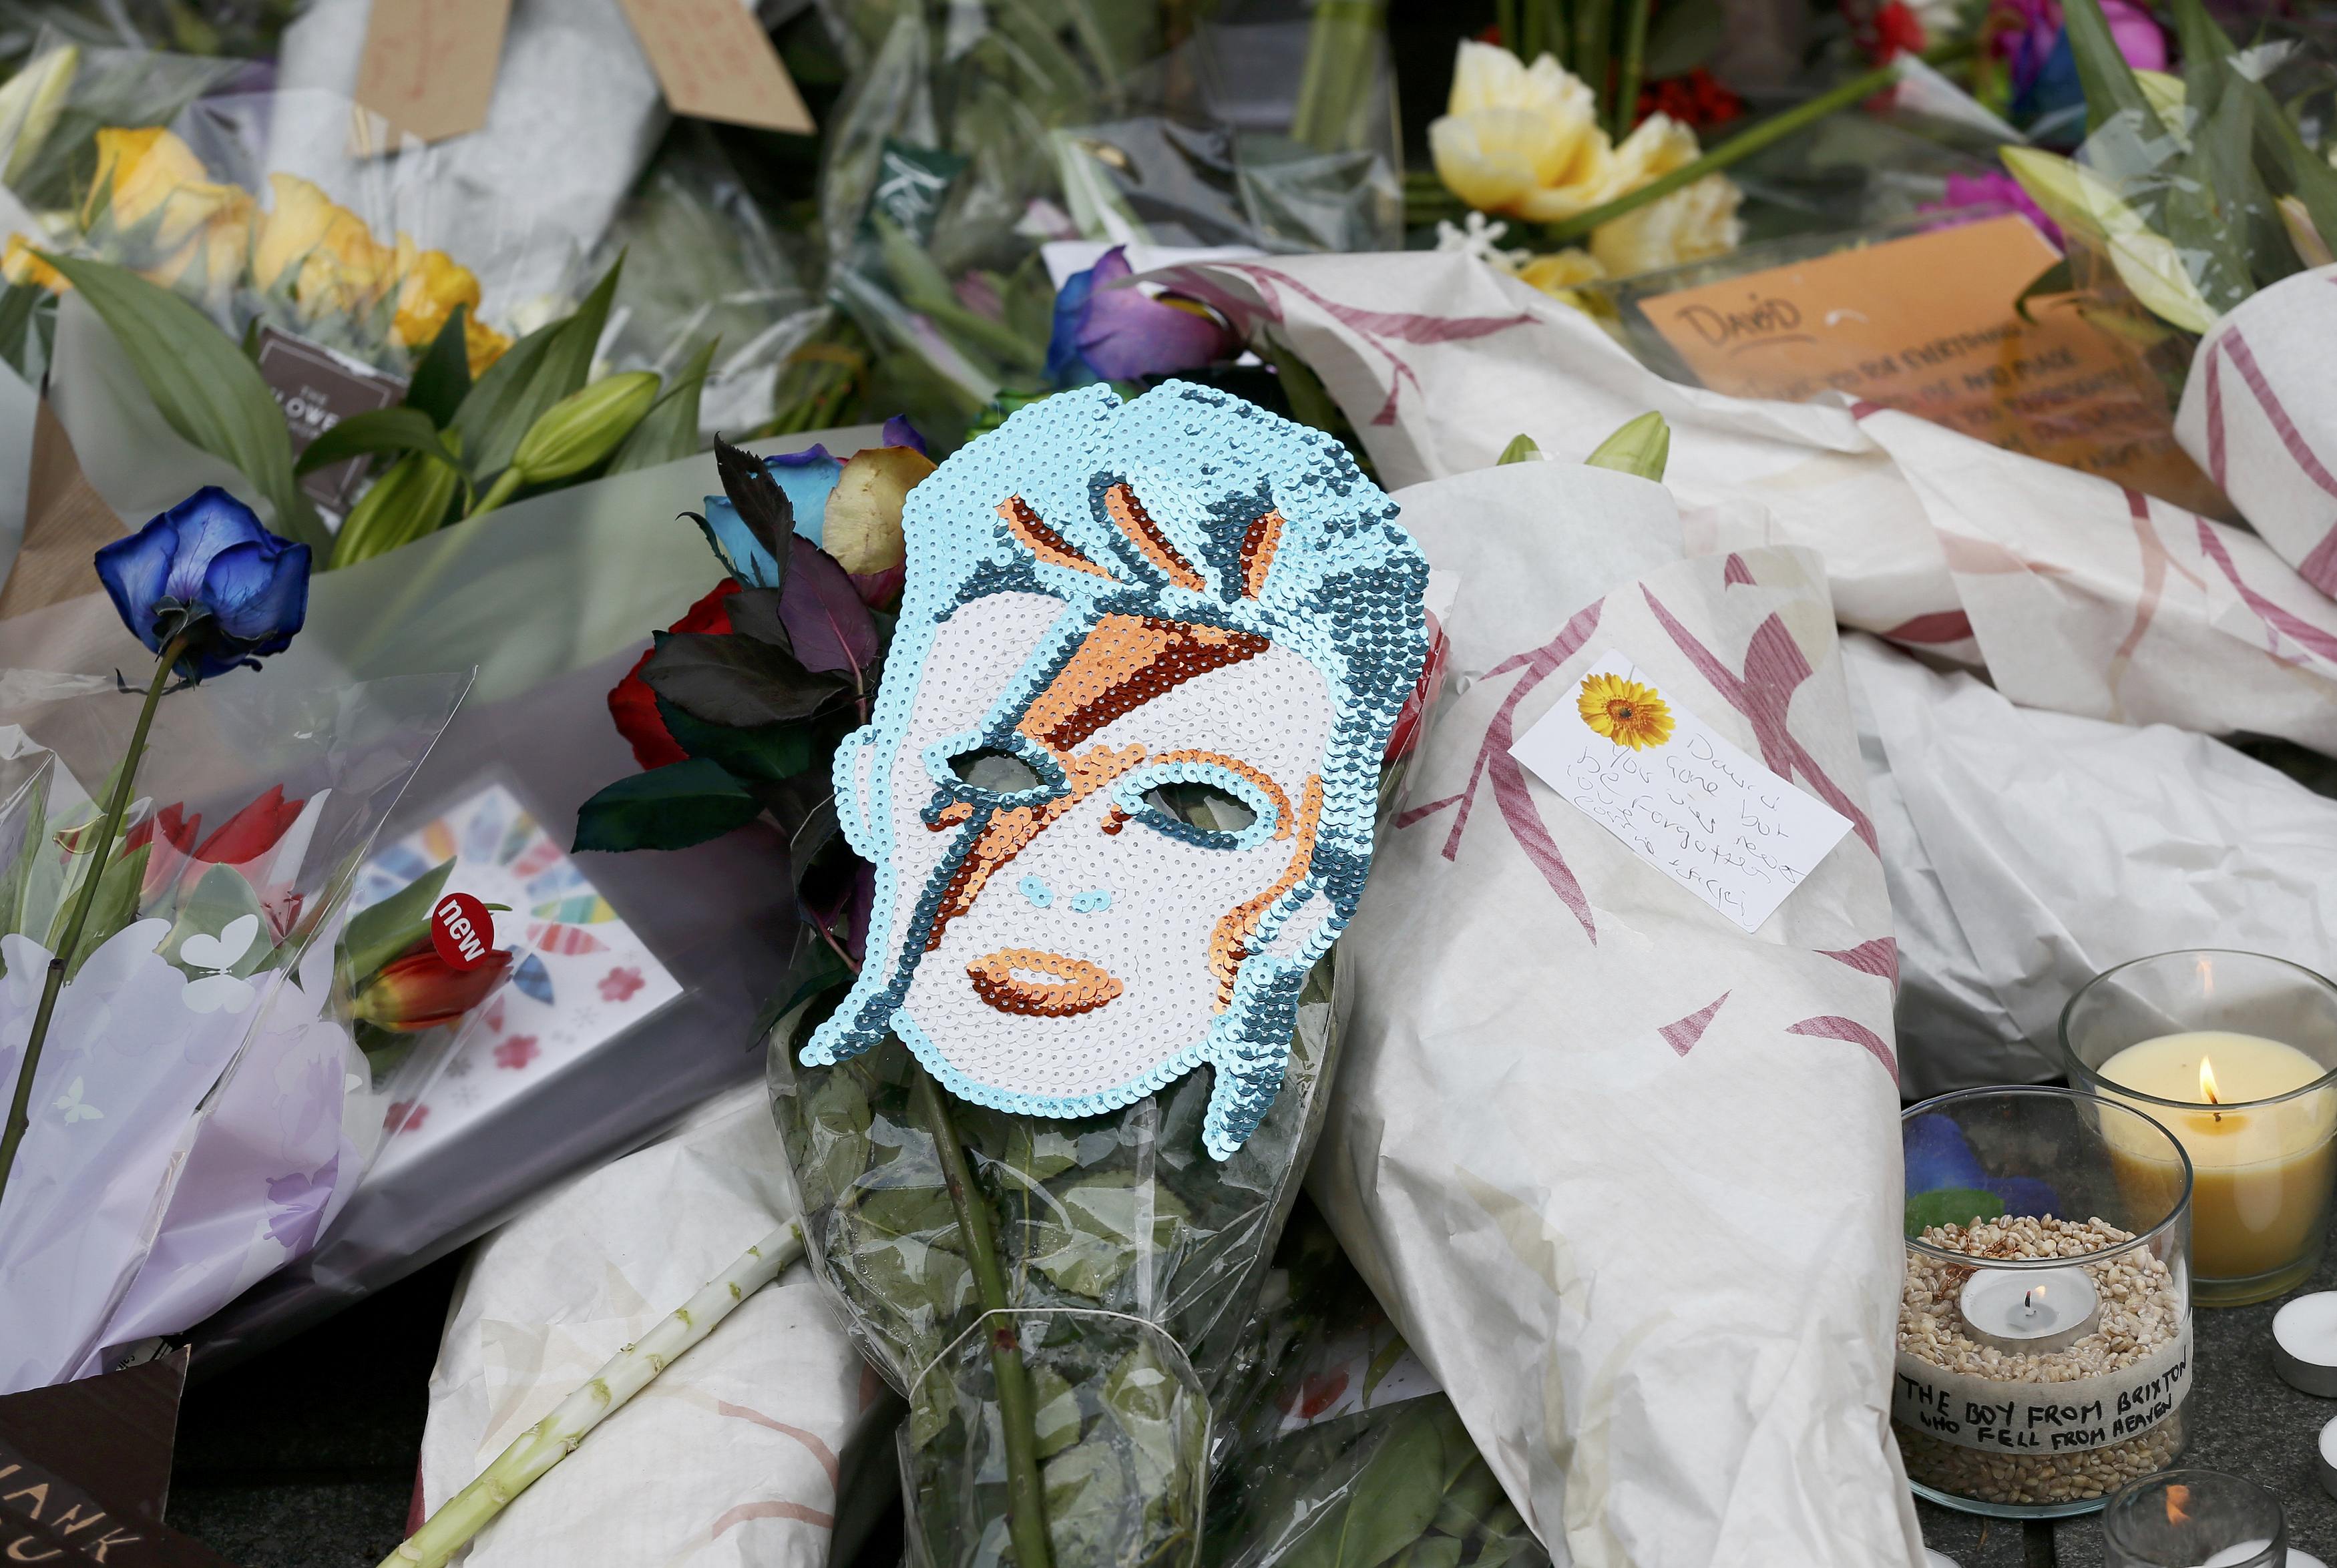 Flowers and tributes lie at a mural of David Bowie in Brixton, south London.